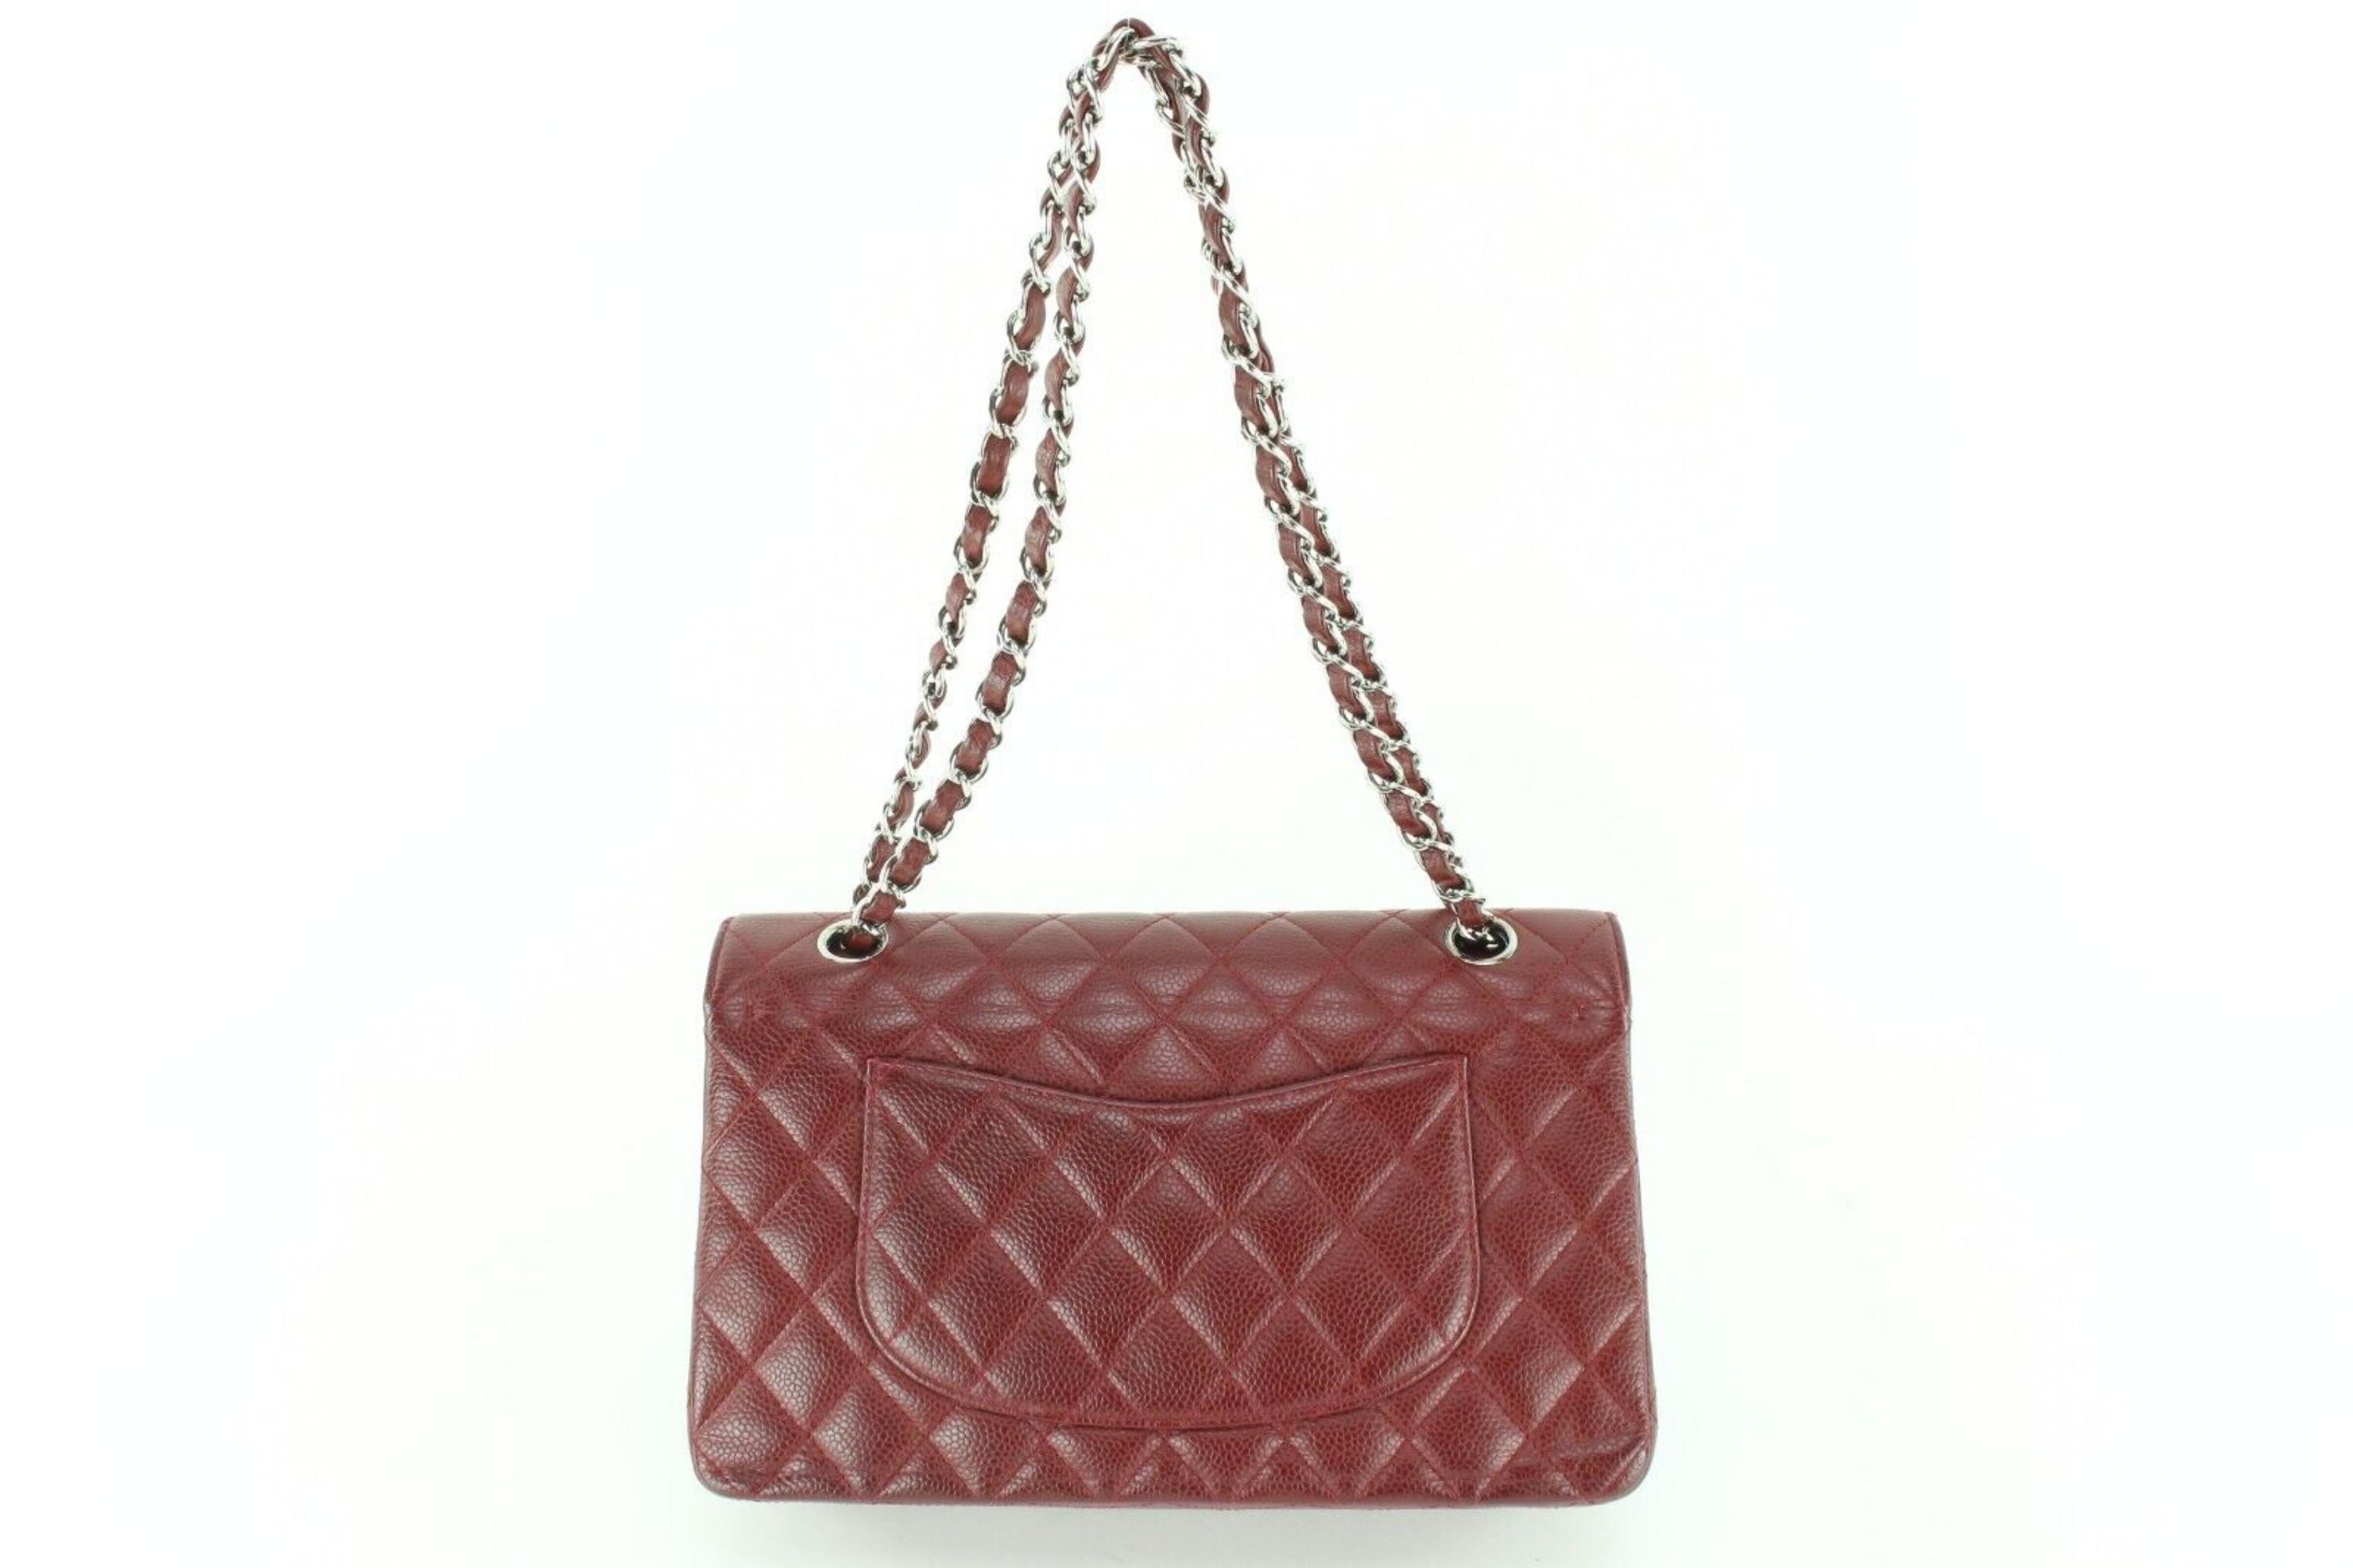 SOLD) CHANEL Wallet On Chain Caviar Red SHW